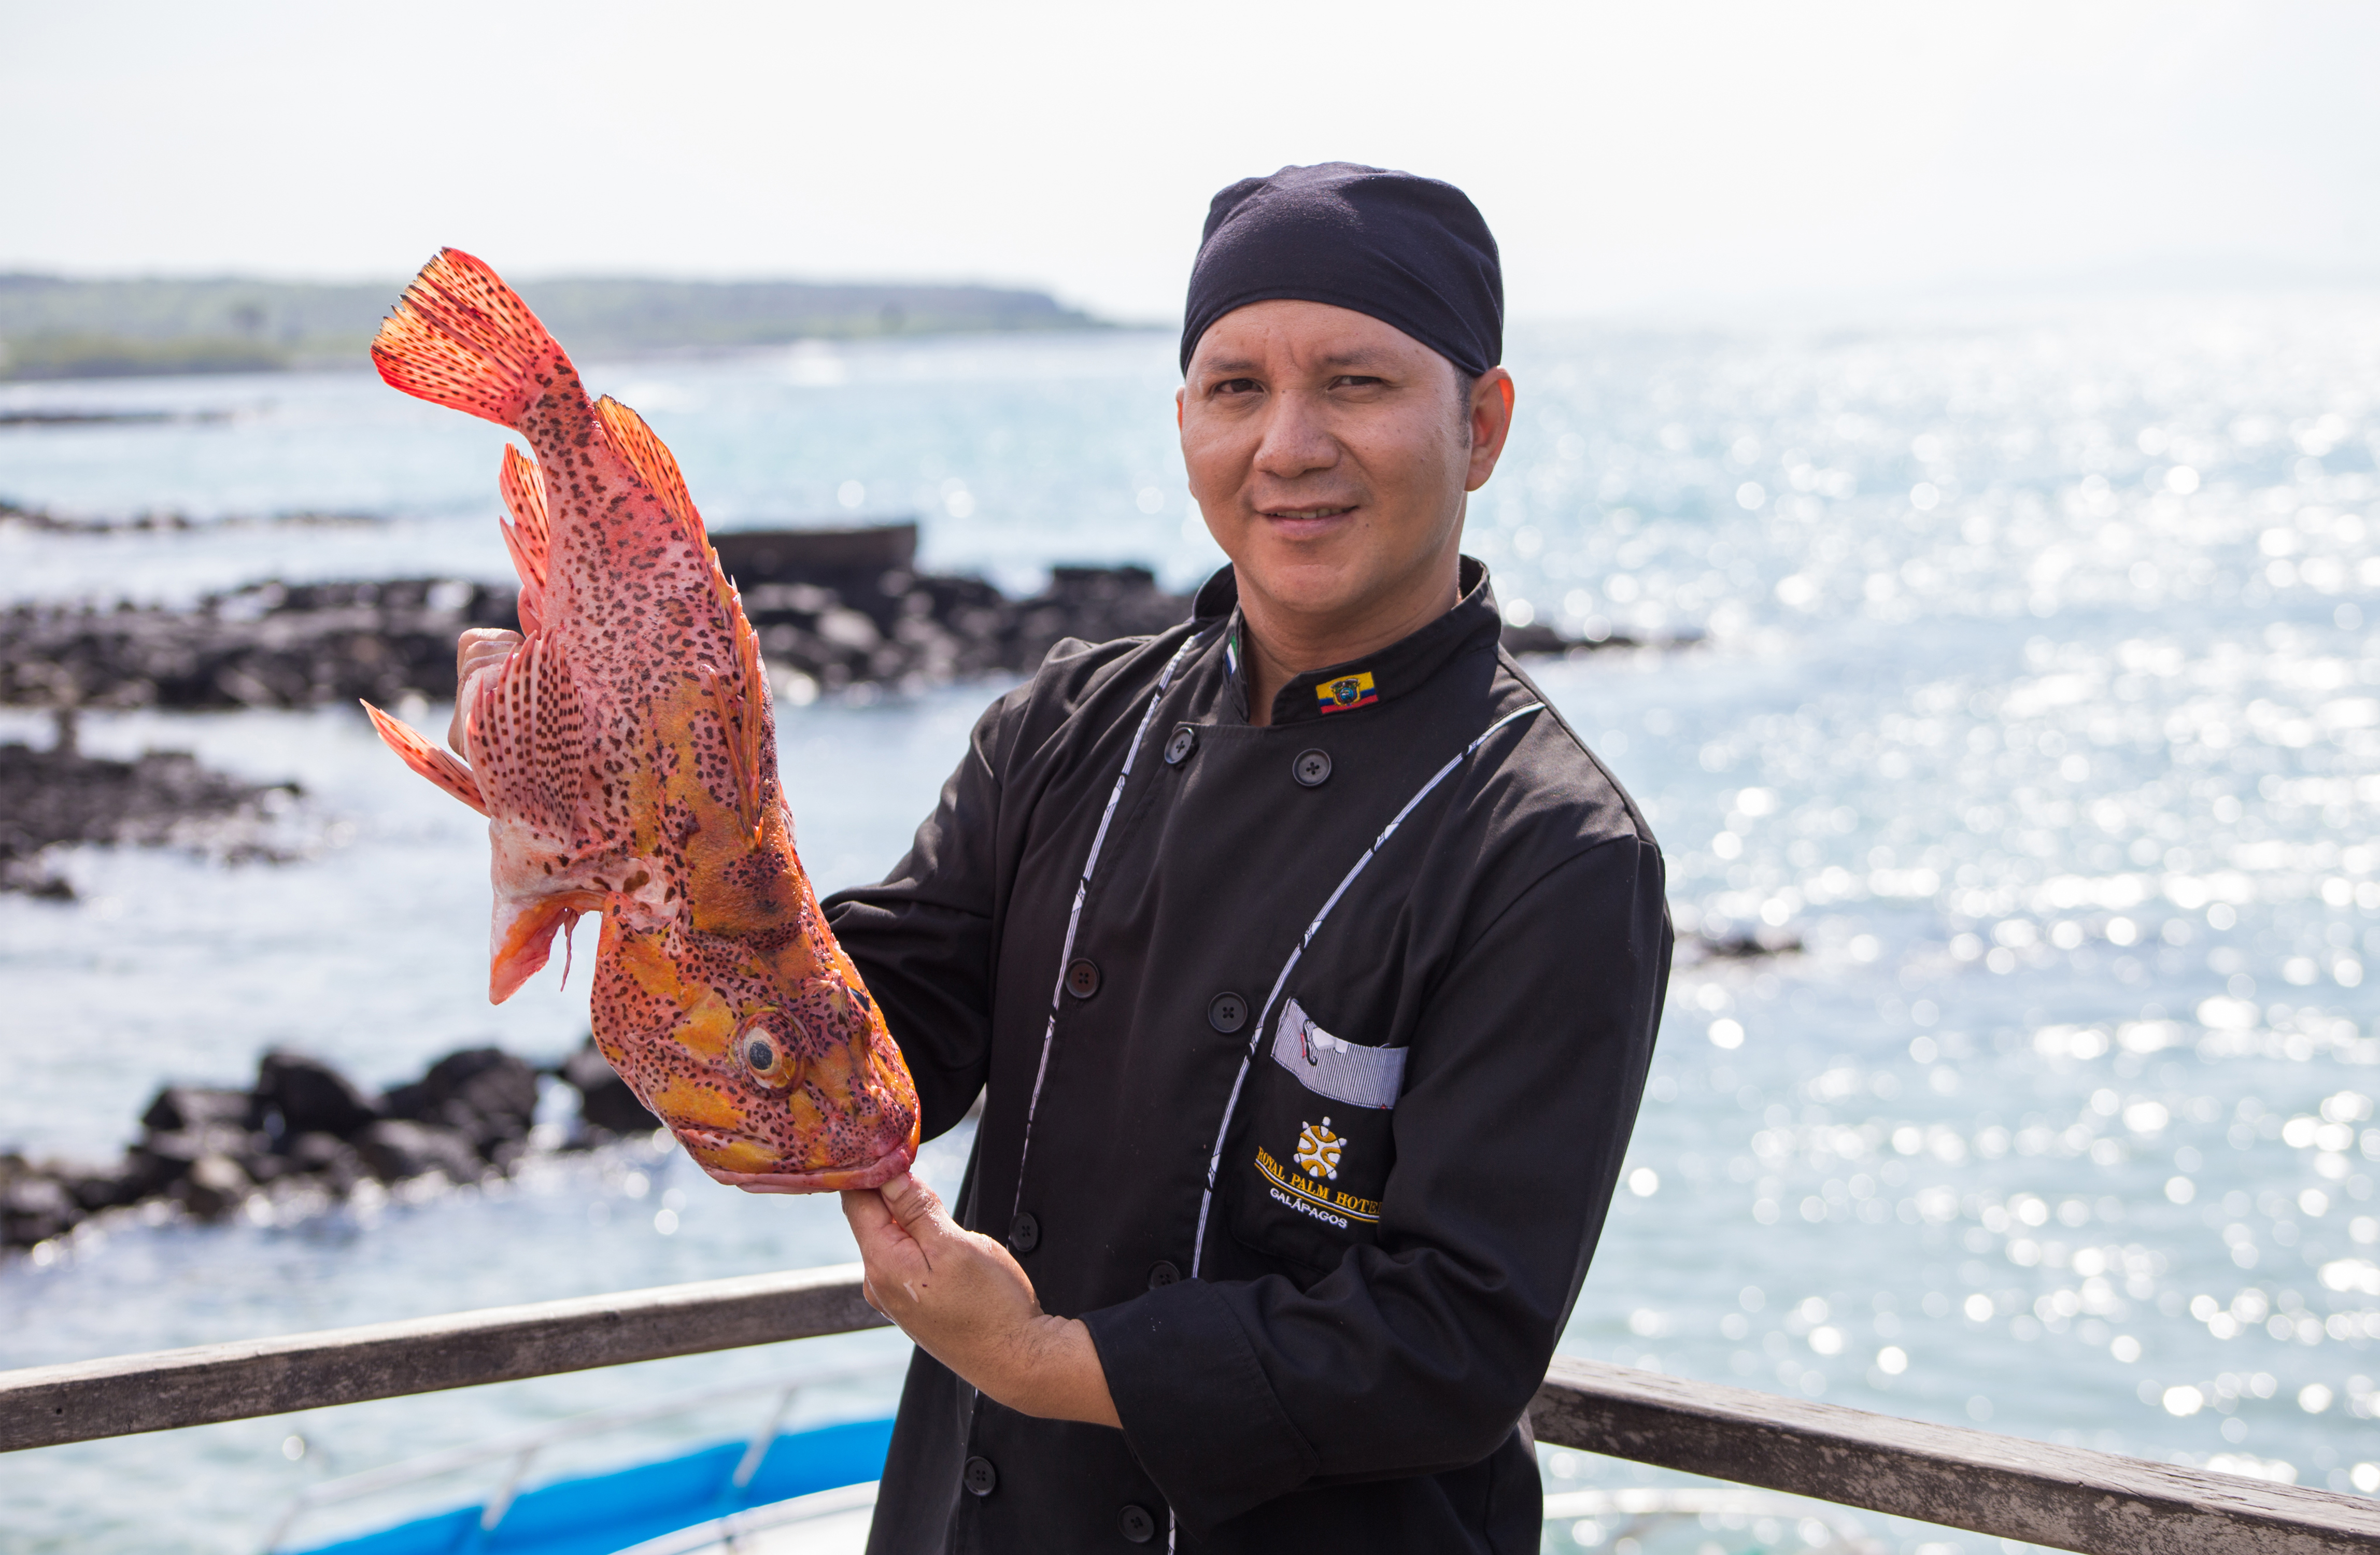 Chef holding a dead fish